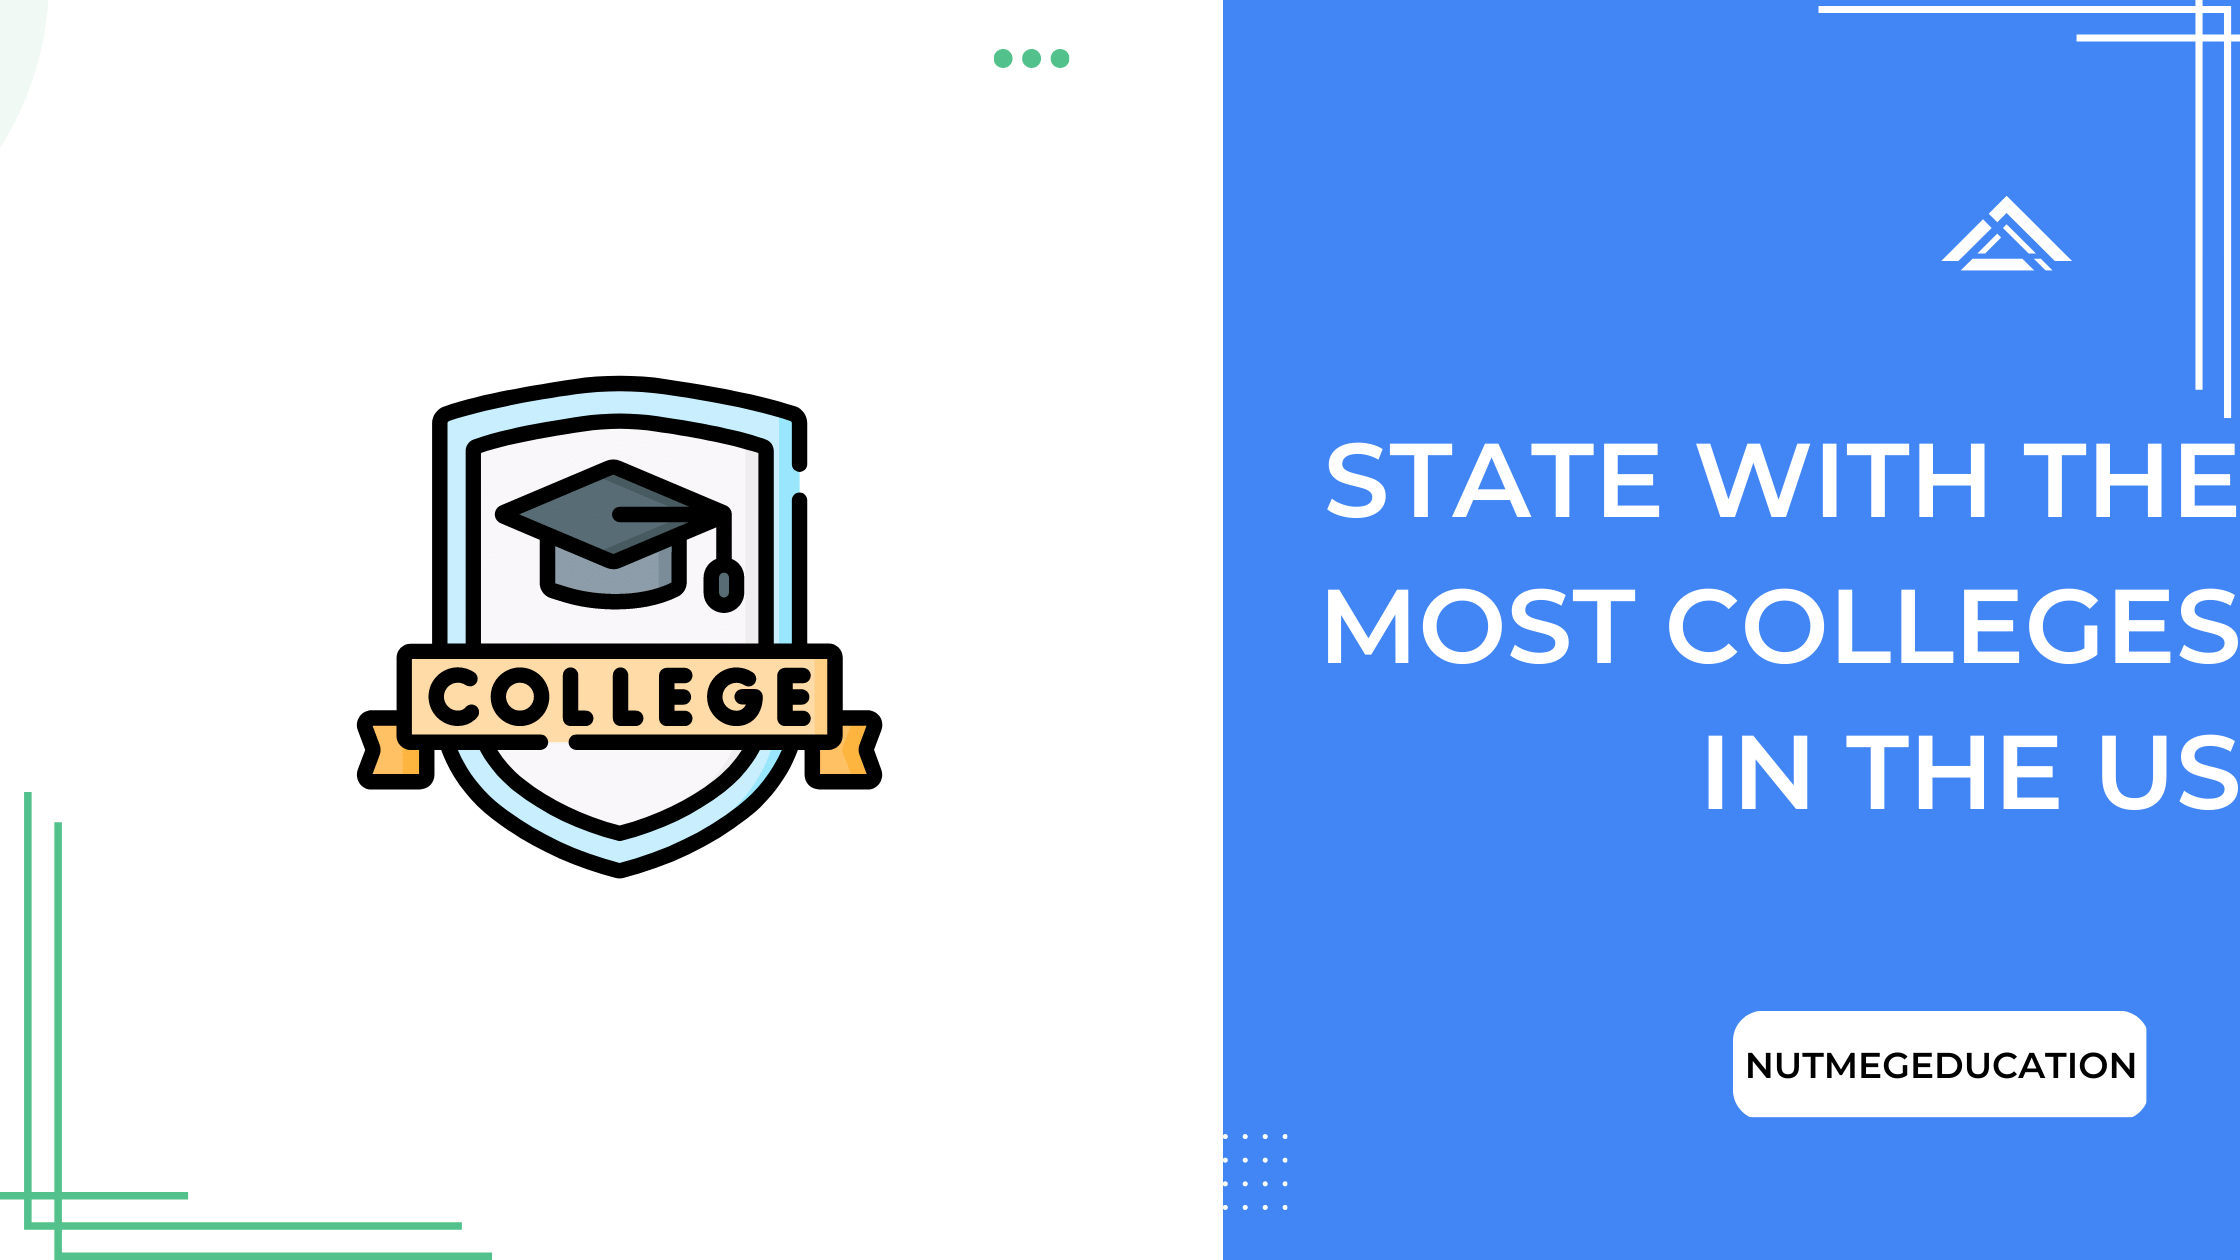 State With The Most Colleges - NutMegEducation